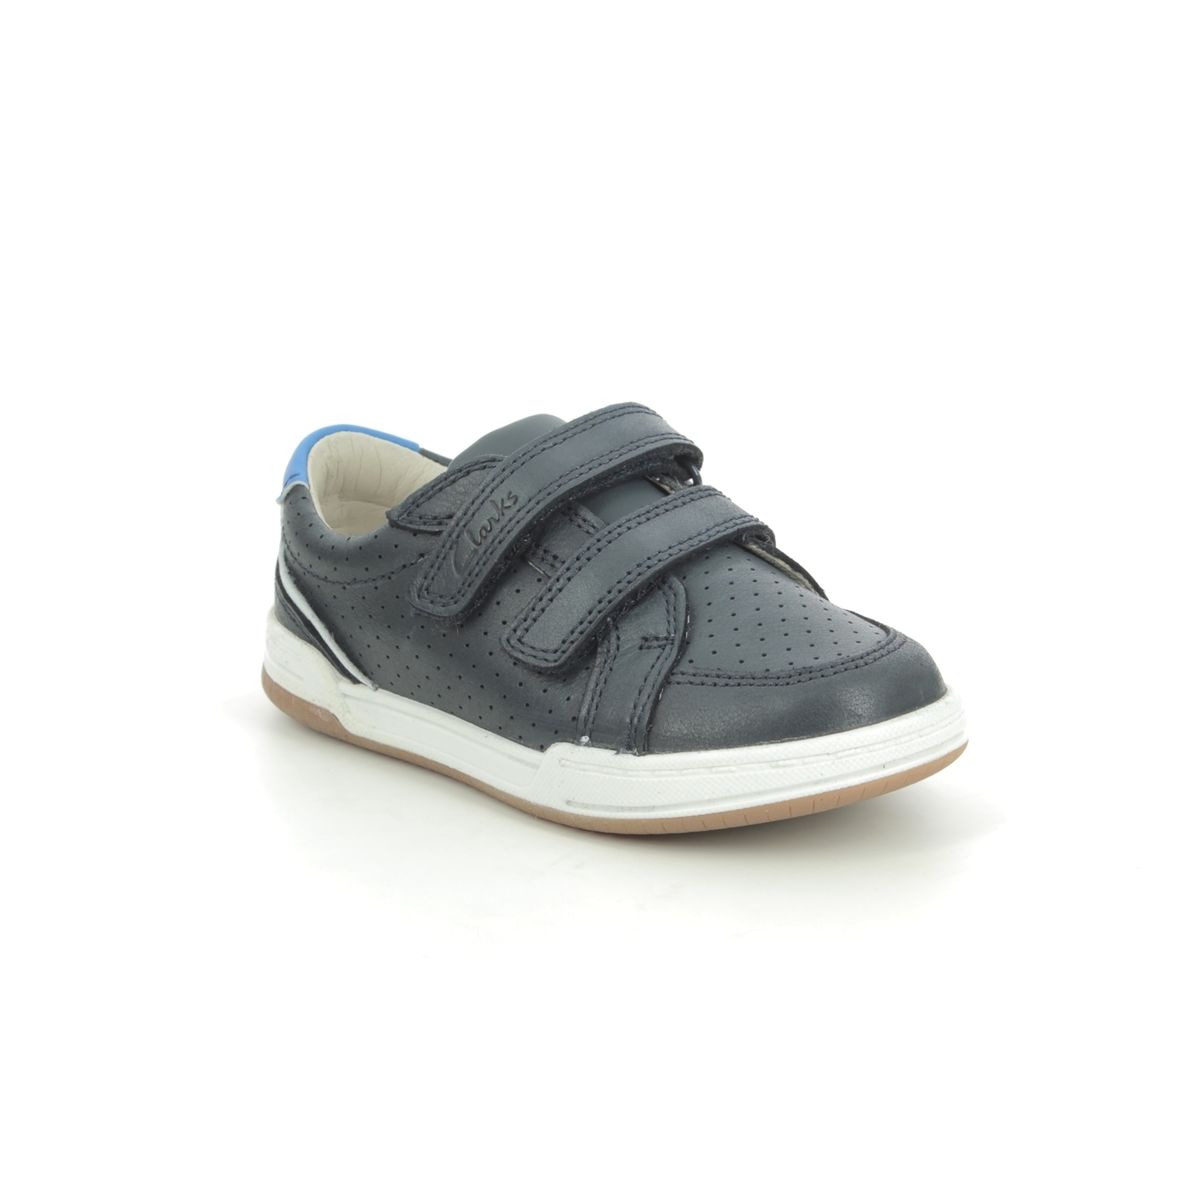 Clarks Fawn Solo T Navy Leather Kids Boys Toddler Shoes 589886F In Size 6 In Plain Navy Leather F Width Fitting Regular Fit For kids